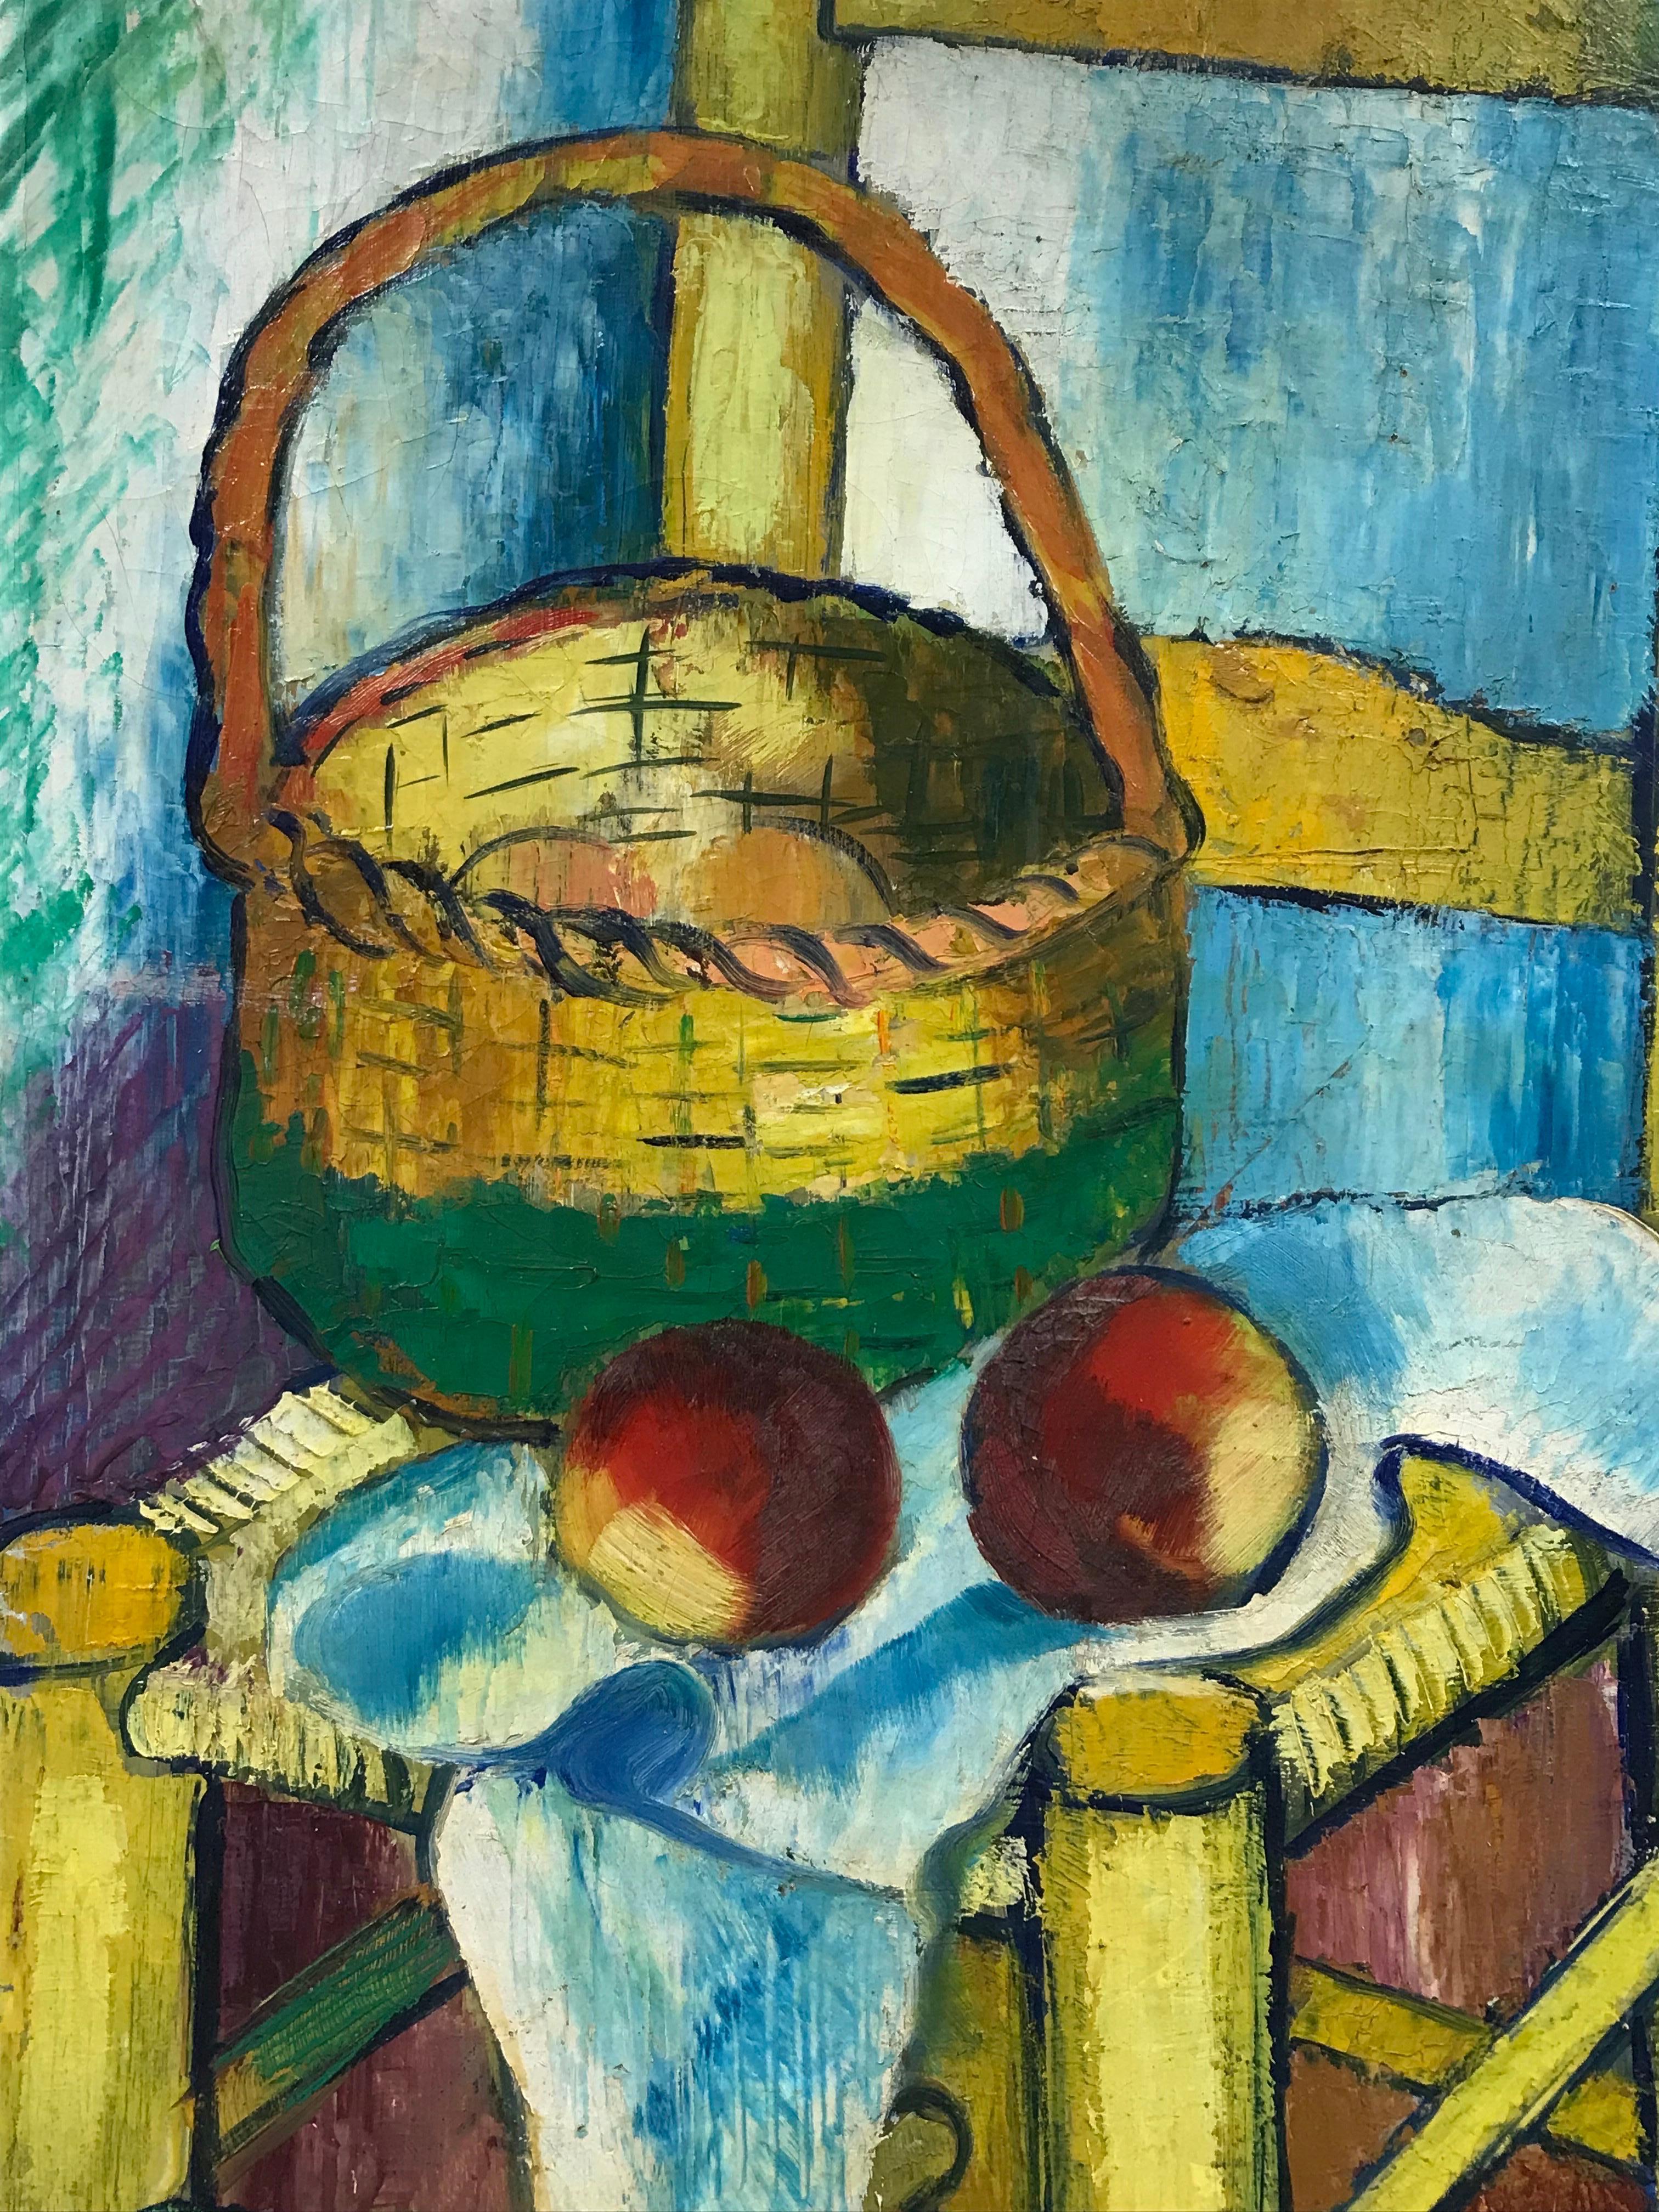 Artist/ School: French School, signed and dated 1940's

Title: Post-Impressionist oil depicting this 'Van Gogh' chair in an interior with fruit. 

Medium: oil on canvas, unframed 

Canvas: 32 x 21 inches

Provenance: private collection,